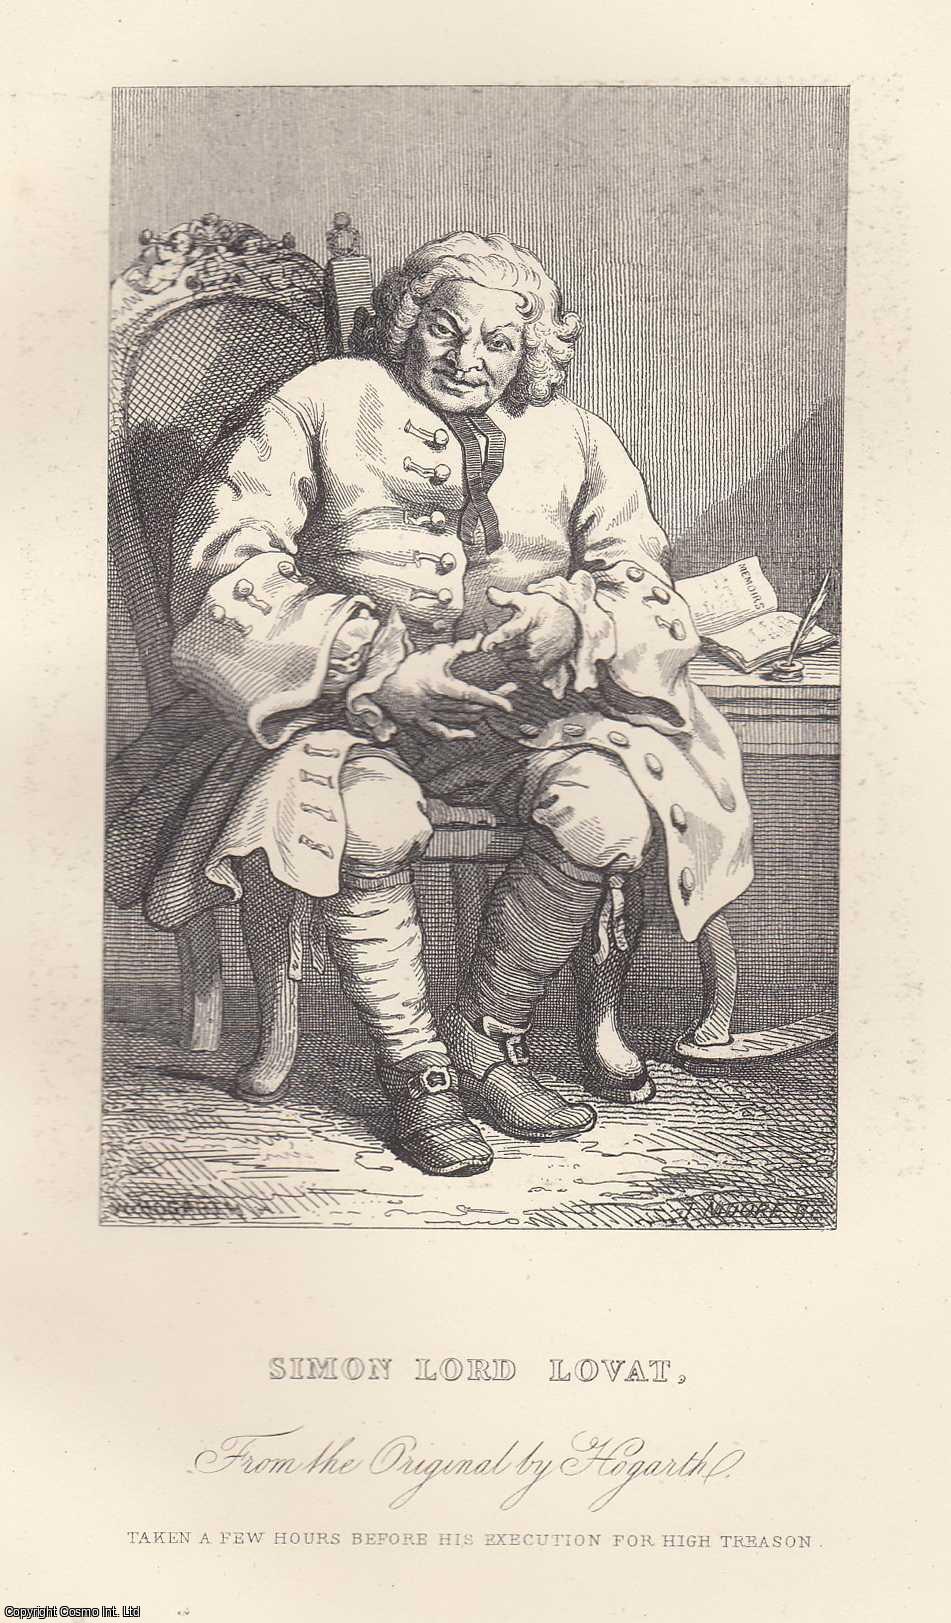 STEEL ENGRAVING - William Hogarth : Simon, Lord Lovat. Executed in 1745 following the Jacobite Uprising. Steel engraving, image area 9 x 14.5 cms approx. This is an original 153 year old print separated from The Complete Works of William Hogarth, London, printed 1870.